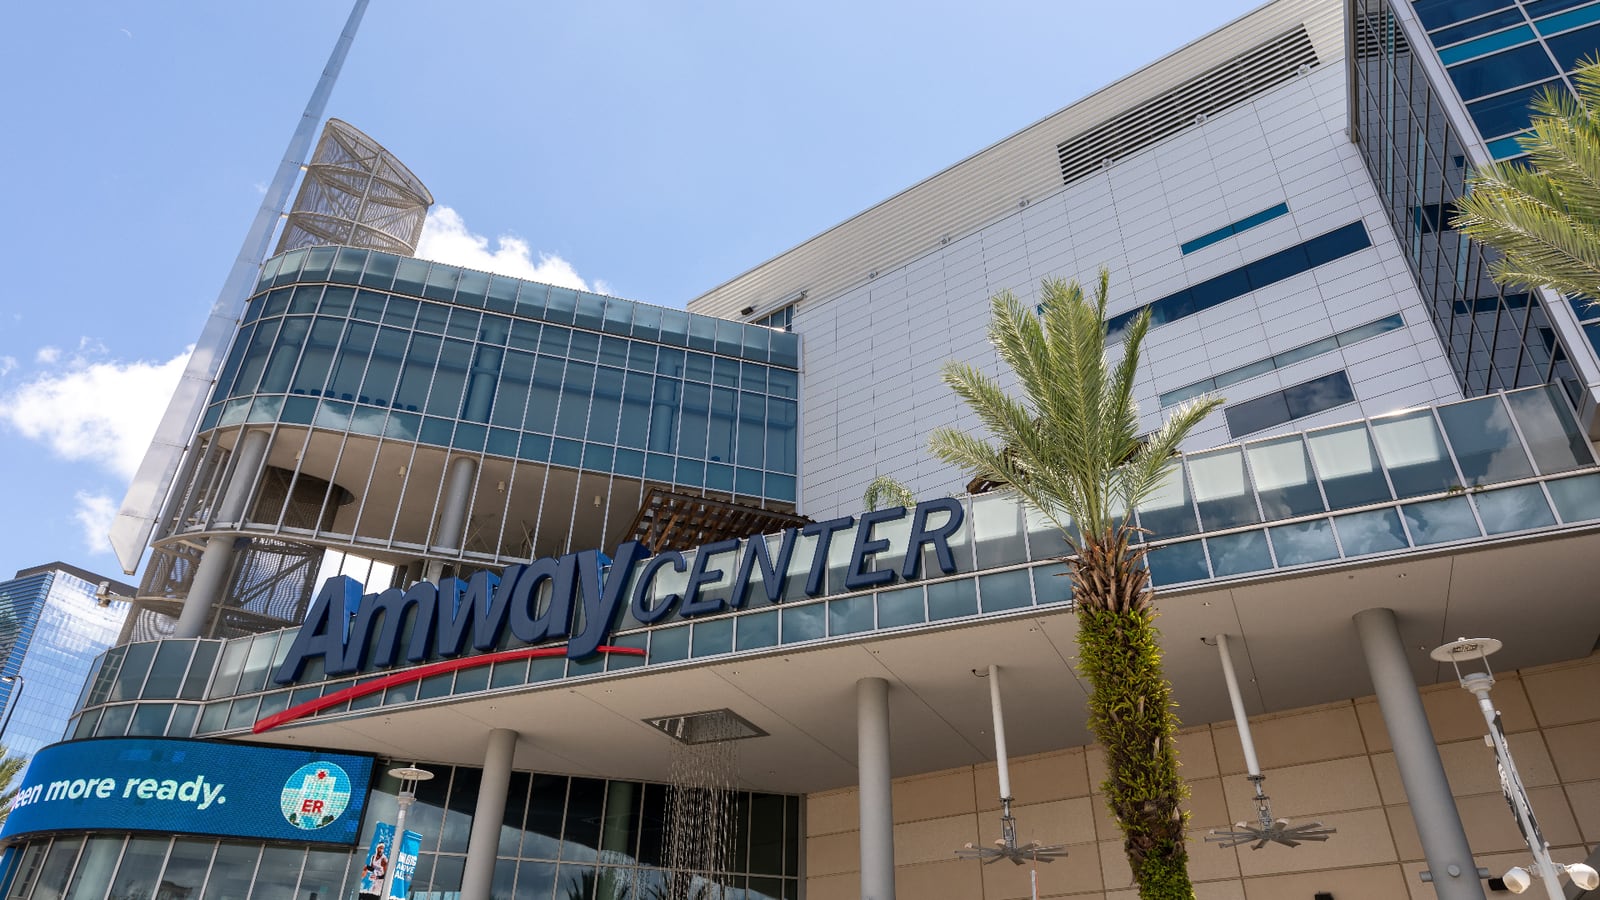 Happening today Amway Center hosting job fair for event staff WFTV